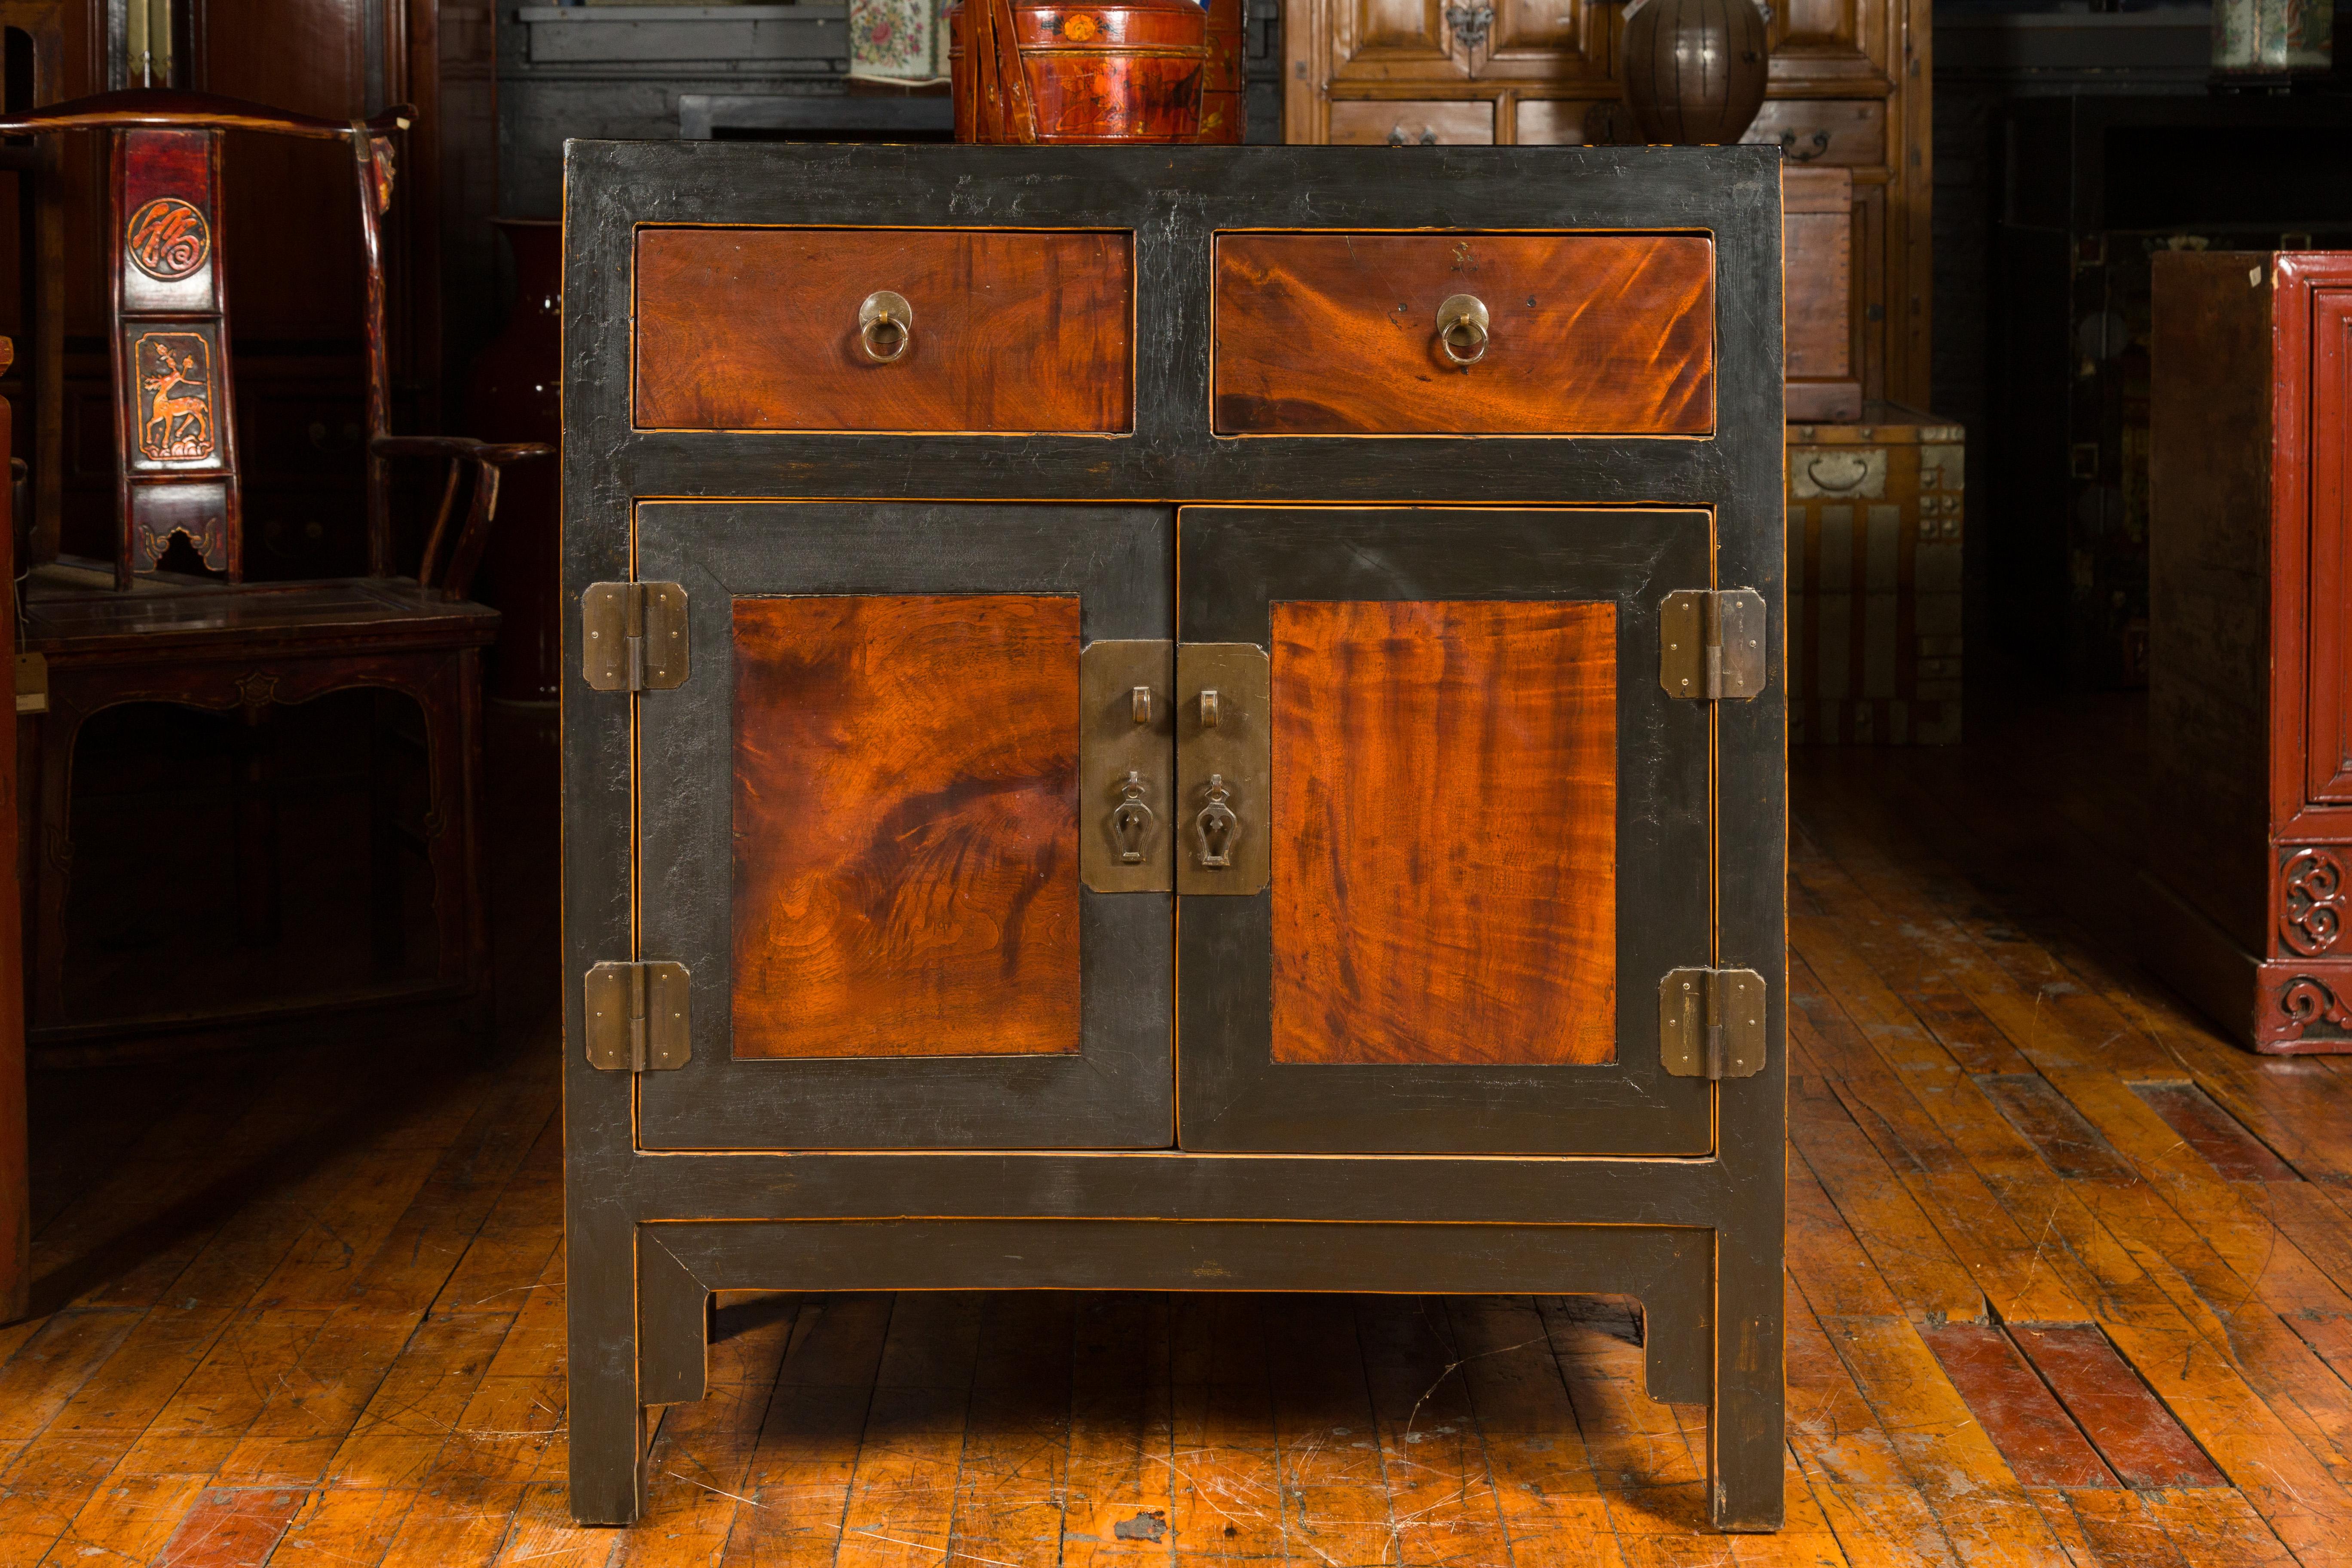 A Qing Dynasty period antique two-toned cabinet from the 19th century, with two drawers over double doors. This Qing Dynasty era antique cabinet, hailing from 19th-century China, presents a distinguished two-toned exterior that gracefully combines